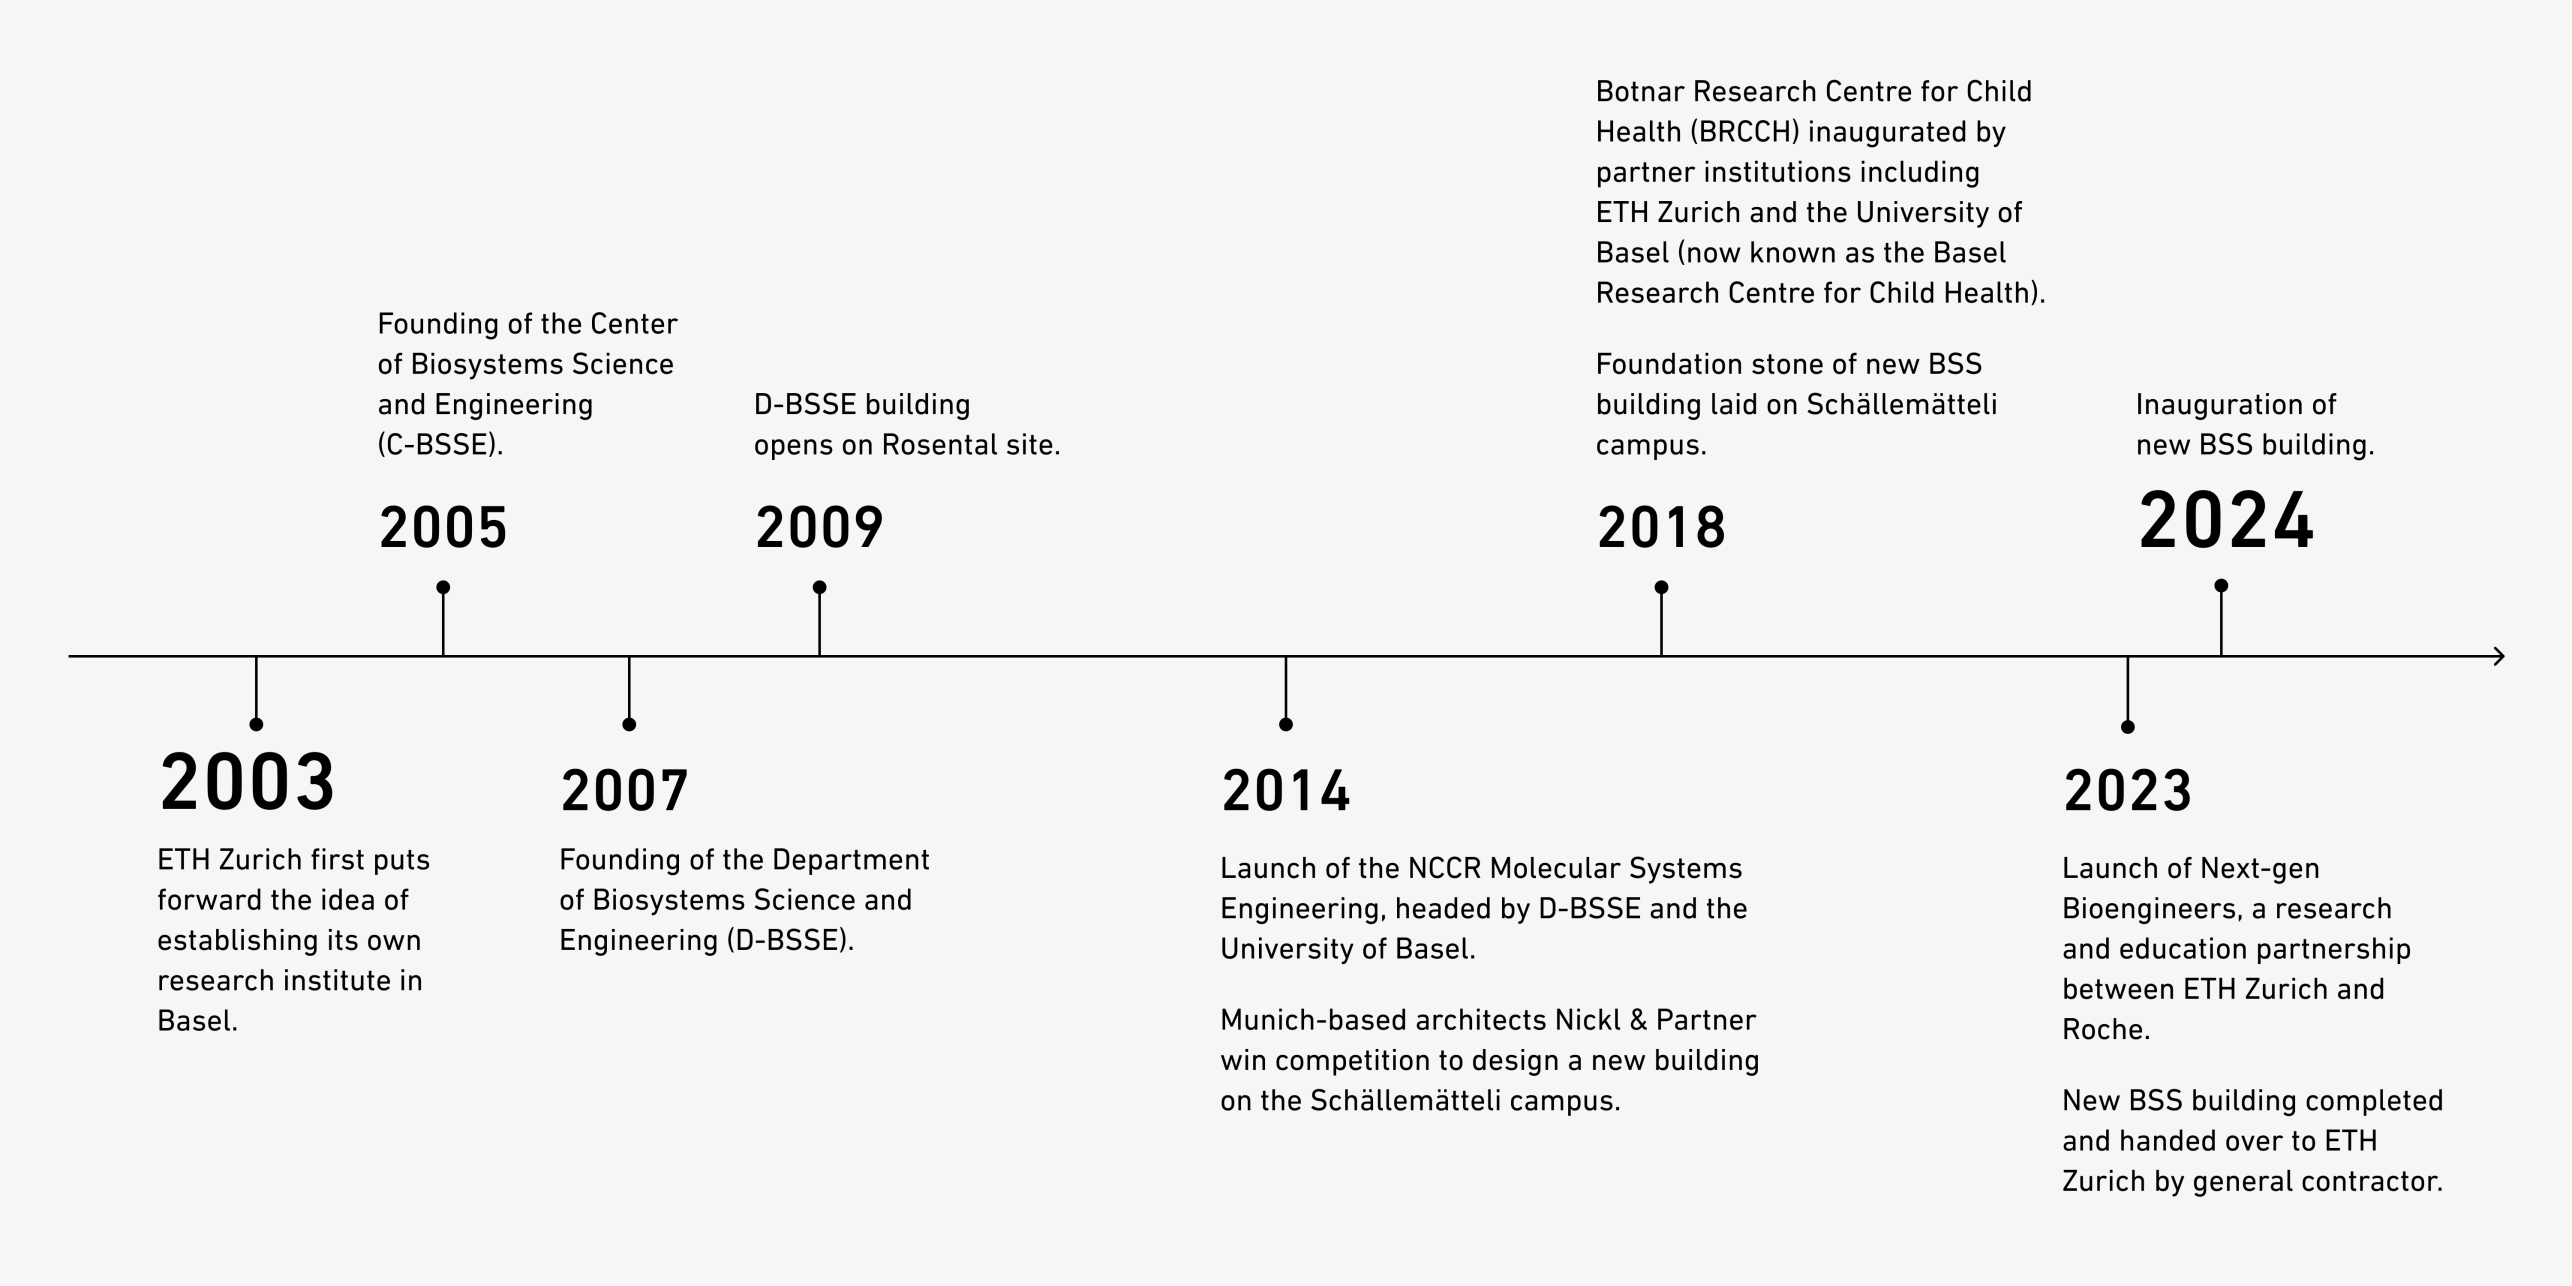 2003: ETH Zurich first puts forward the idea of establishing its own research insitute in Basel.   2005: Founding of the Center of Biosystems Science and Engineering (C-BSSE).   2007: Founding of the Departement of Biosystems Science and Engineering (D-BSSE).   2009: D-BSSE building opens on Rosental site.    2014: Launch of the NCCR Molecular Systems Engineering, headed by D-BSSE and the University of Basel. / Munich-based architects Nickl & Partner win competition to design a new building on the Schällemätteli campus.   2018: Botnar Research Centre for Child Health (BRCCH) inaugurated by partner institutions including ETH Zurich and the University of Basel (now known as the Basel Research Centre for Child Health). / Foundation stone of new BSS building laid on Schällemätteli campus.   2023: Launch of Next-gen Bioengineers, a research and education partnership between ETH Zurich and Roche. / New BSS building completed and handed over to ETH Zurich by general contractor.  2024: Inauguration of new BSS building.